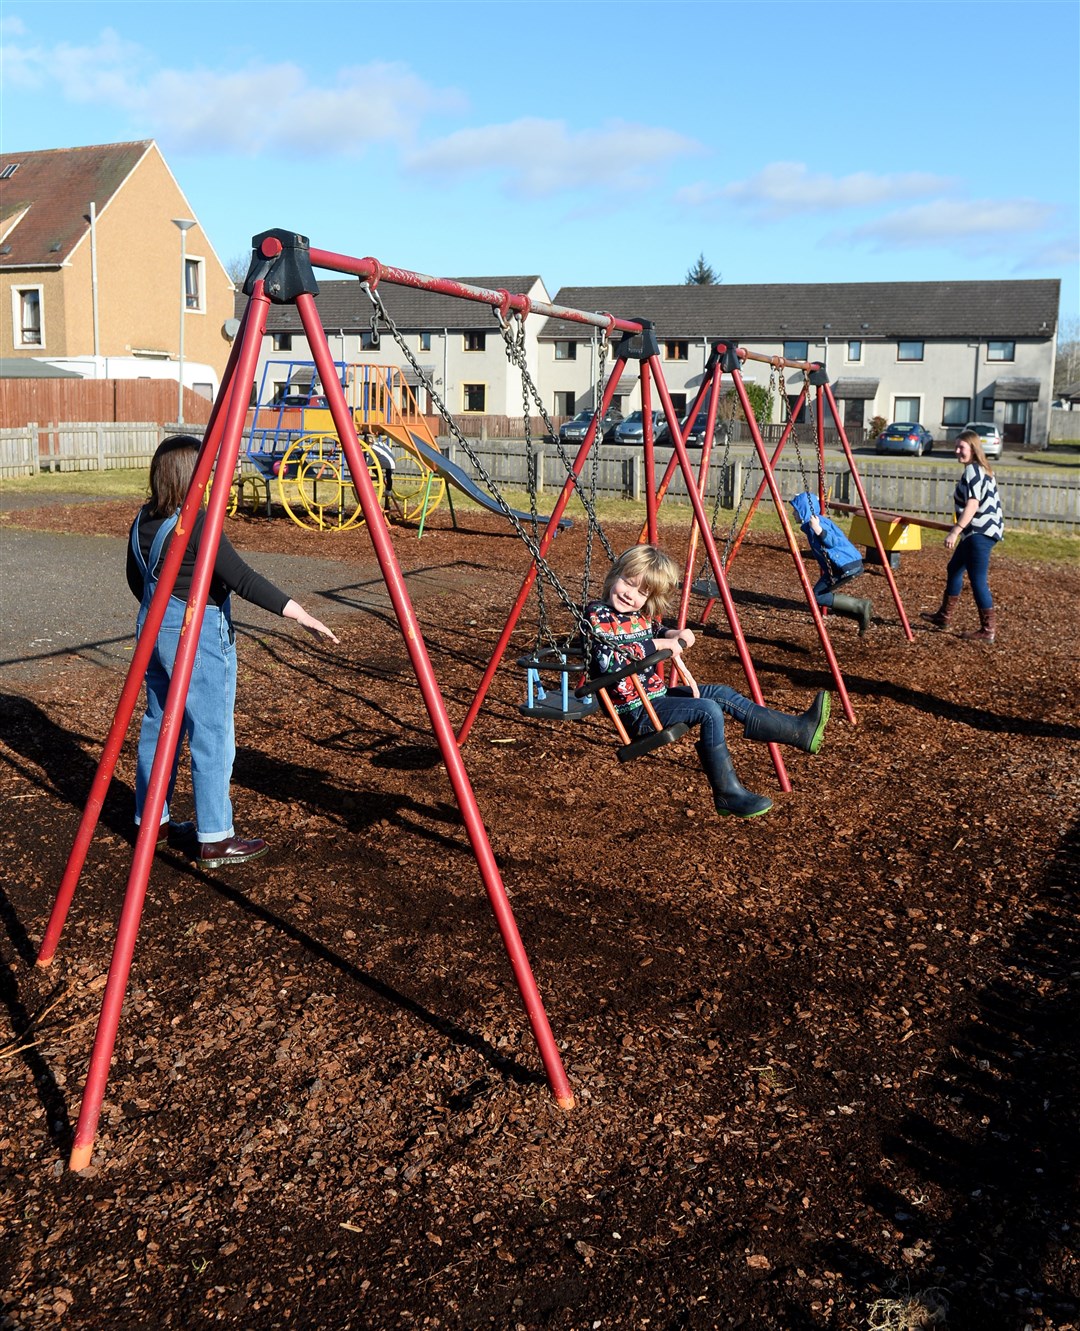 The bark at the play area in Aird Road was deemed to be of insufficient depth.